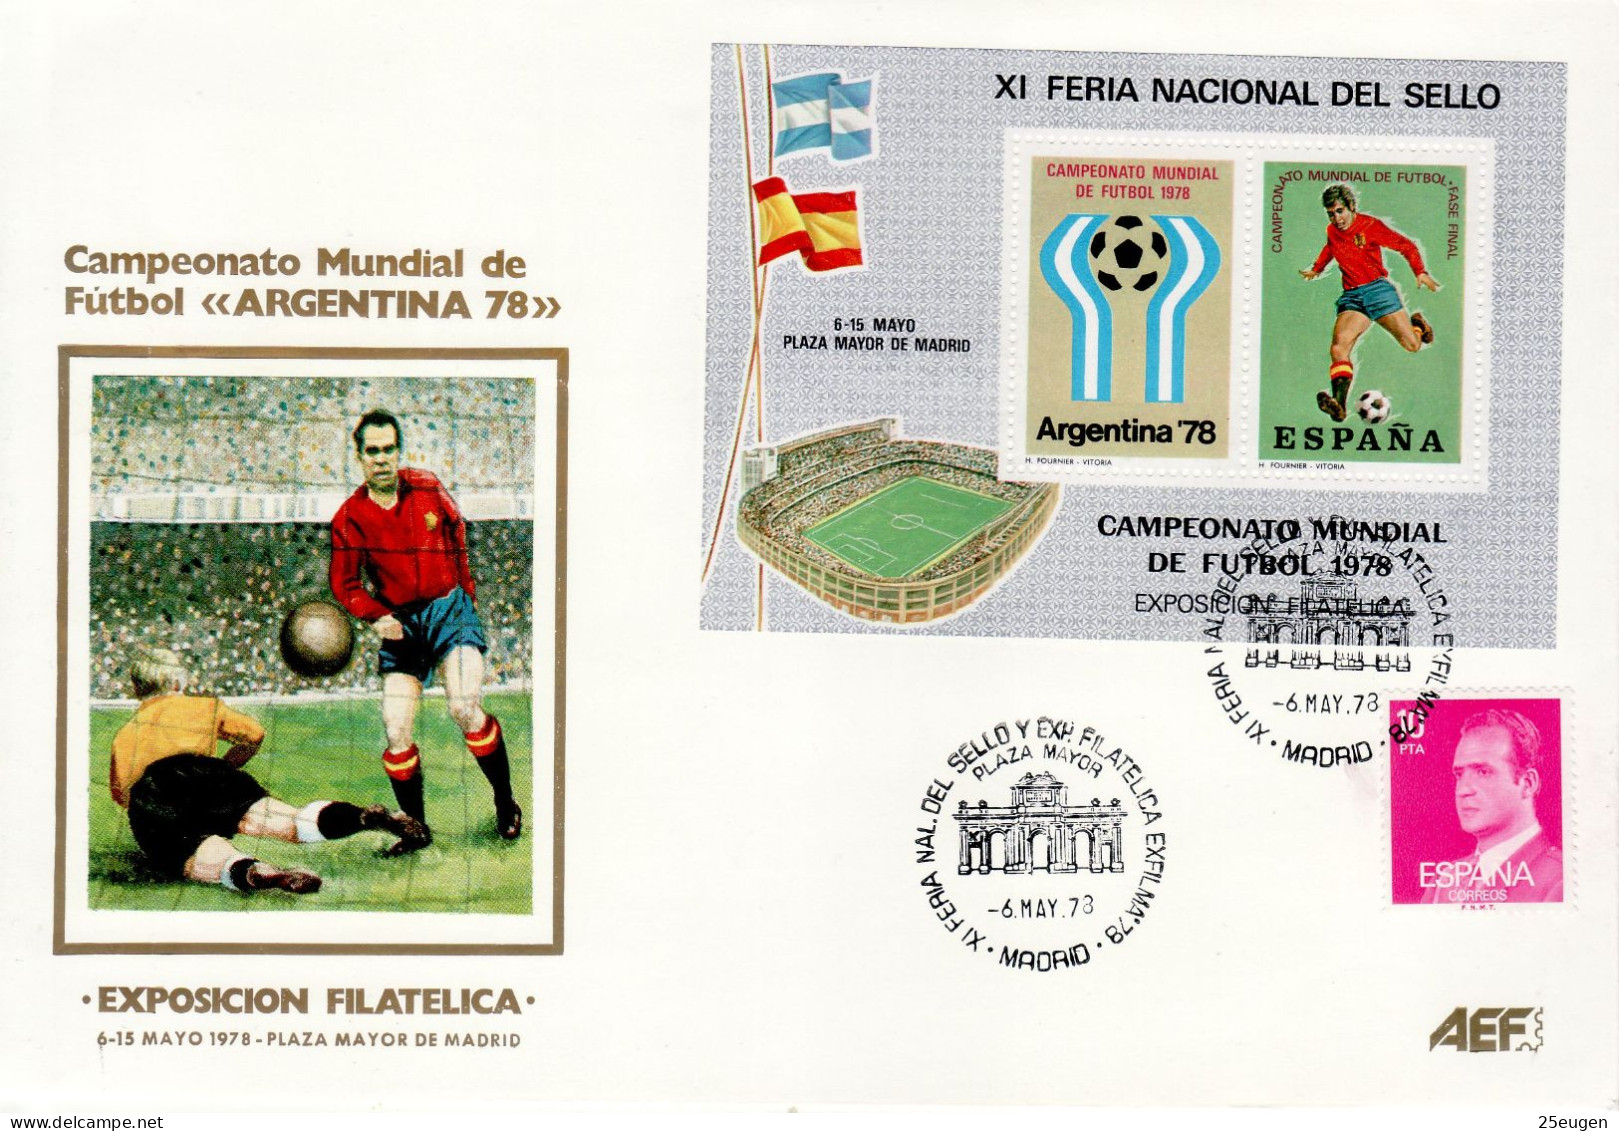 ITALY 1978 COMMEMORATIVE COVER STAMPS EXHIBITION MADRID - 1978 – Argentine